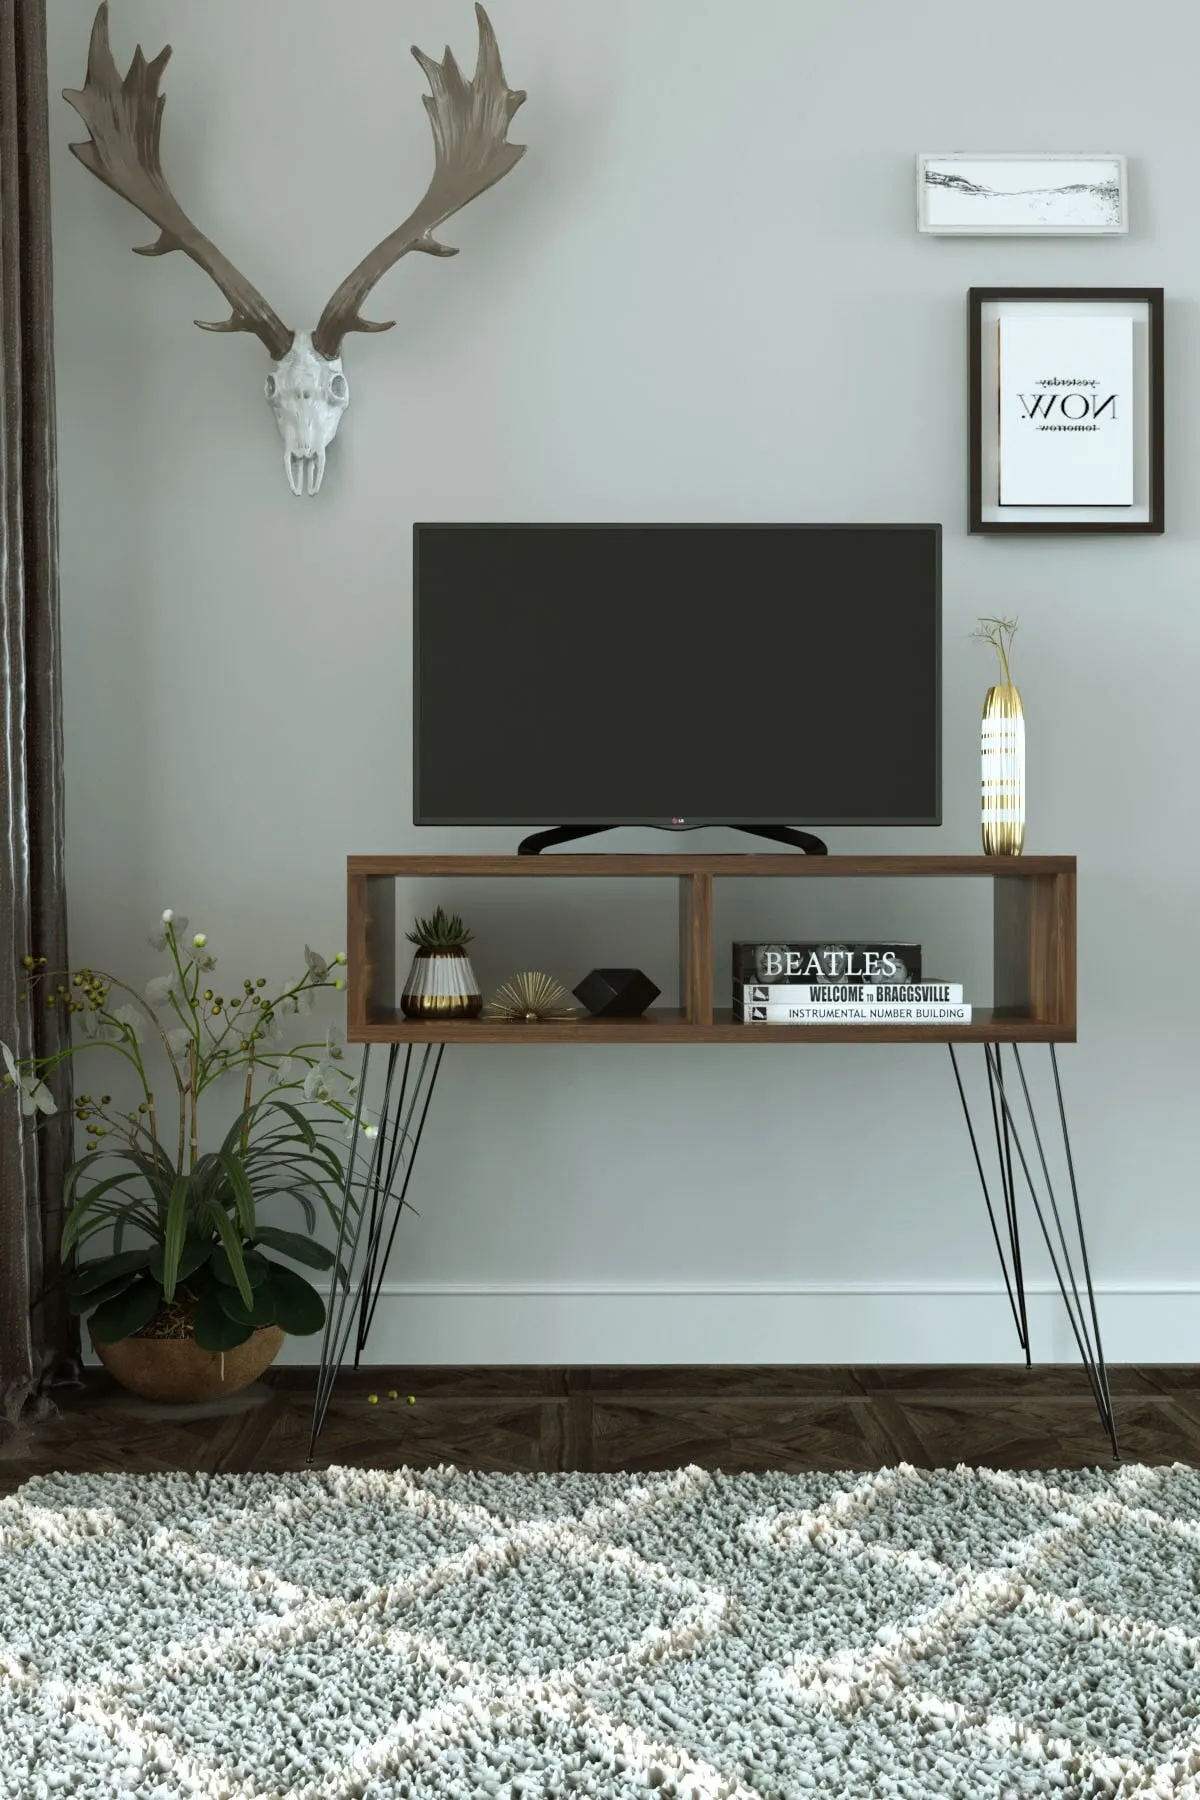 

TV Stand Stylish Design Furniture in Brown Black White Colors Metal Legs Living Room 2 Section Useful Cabinet